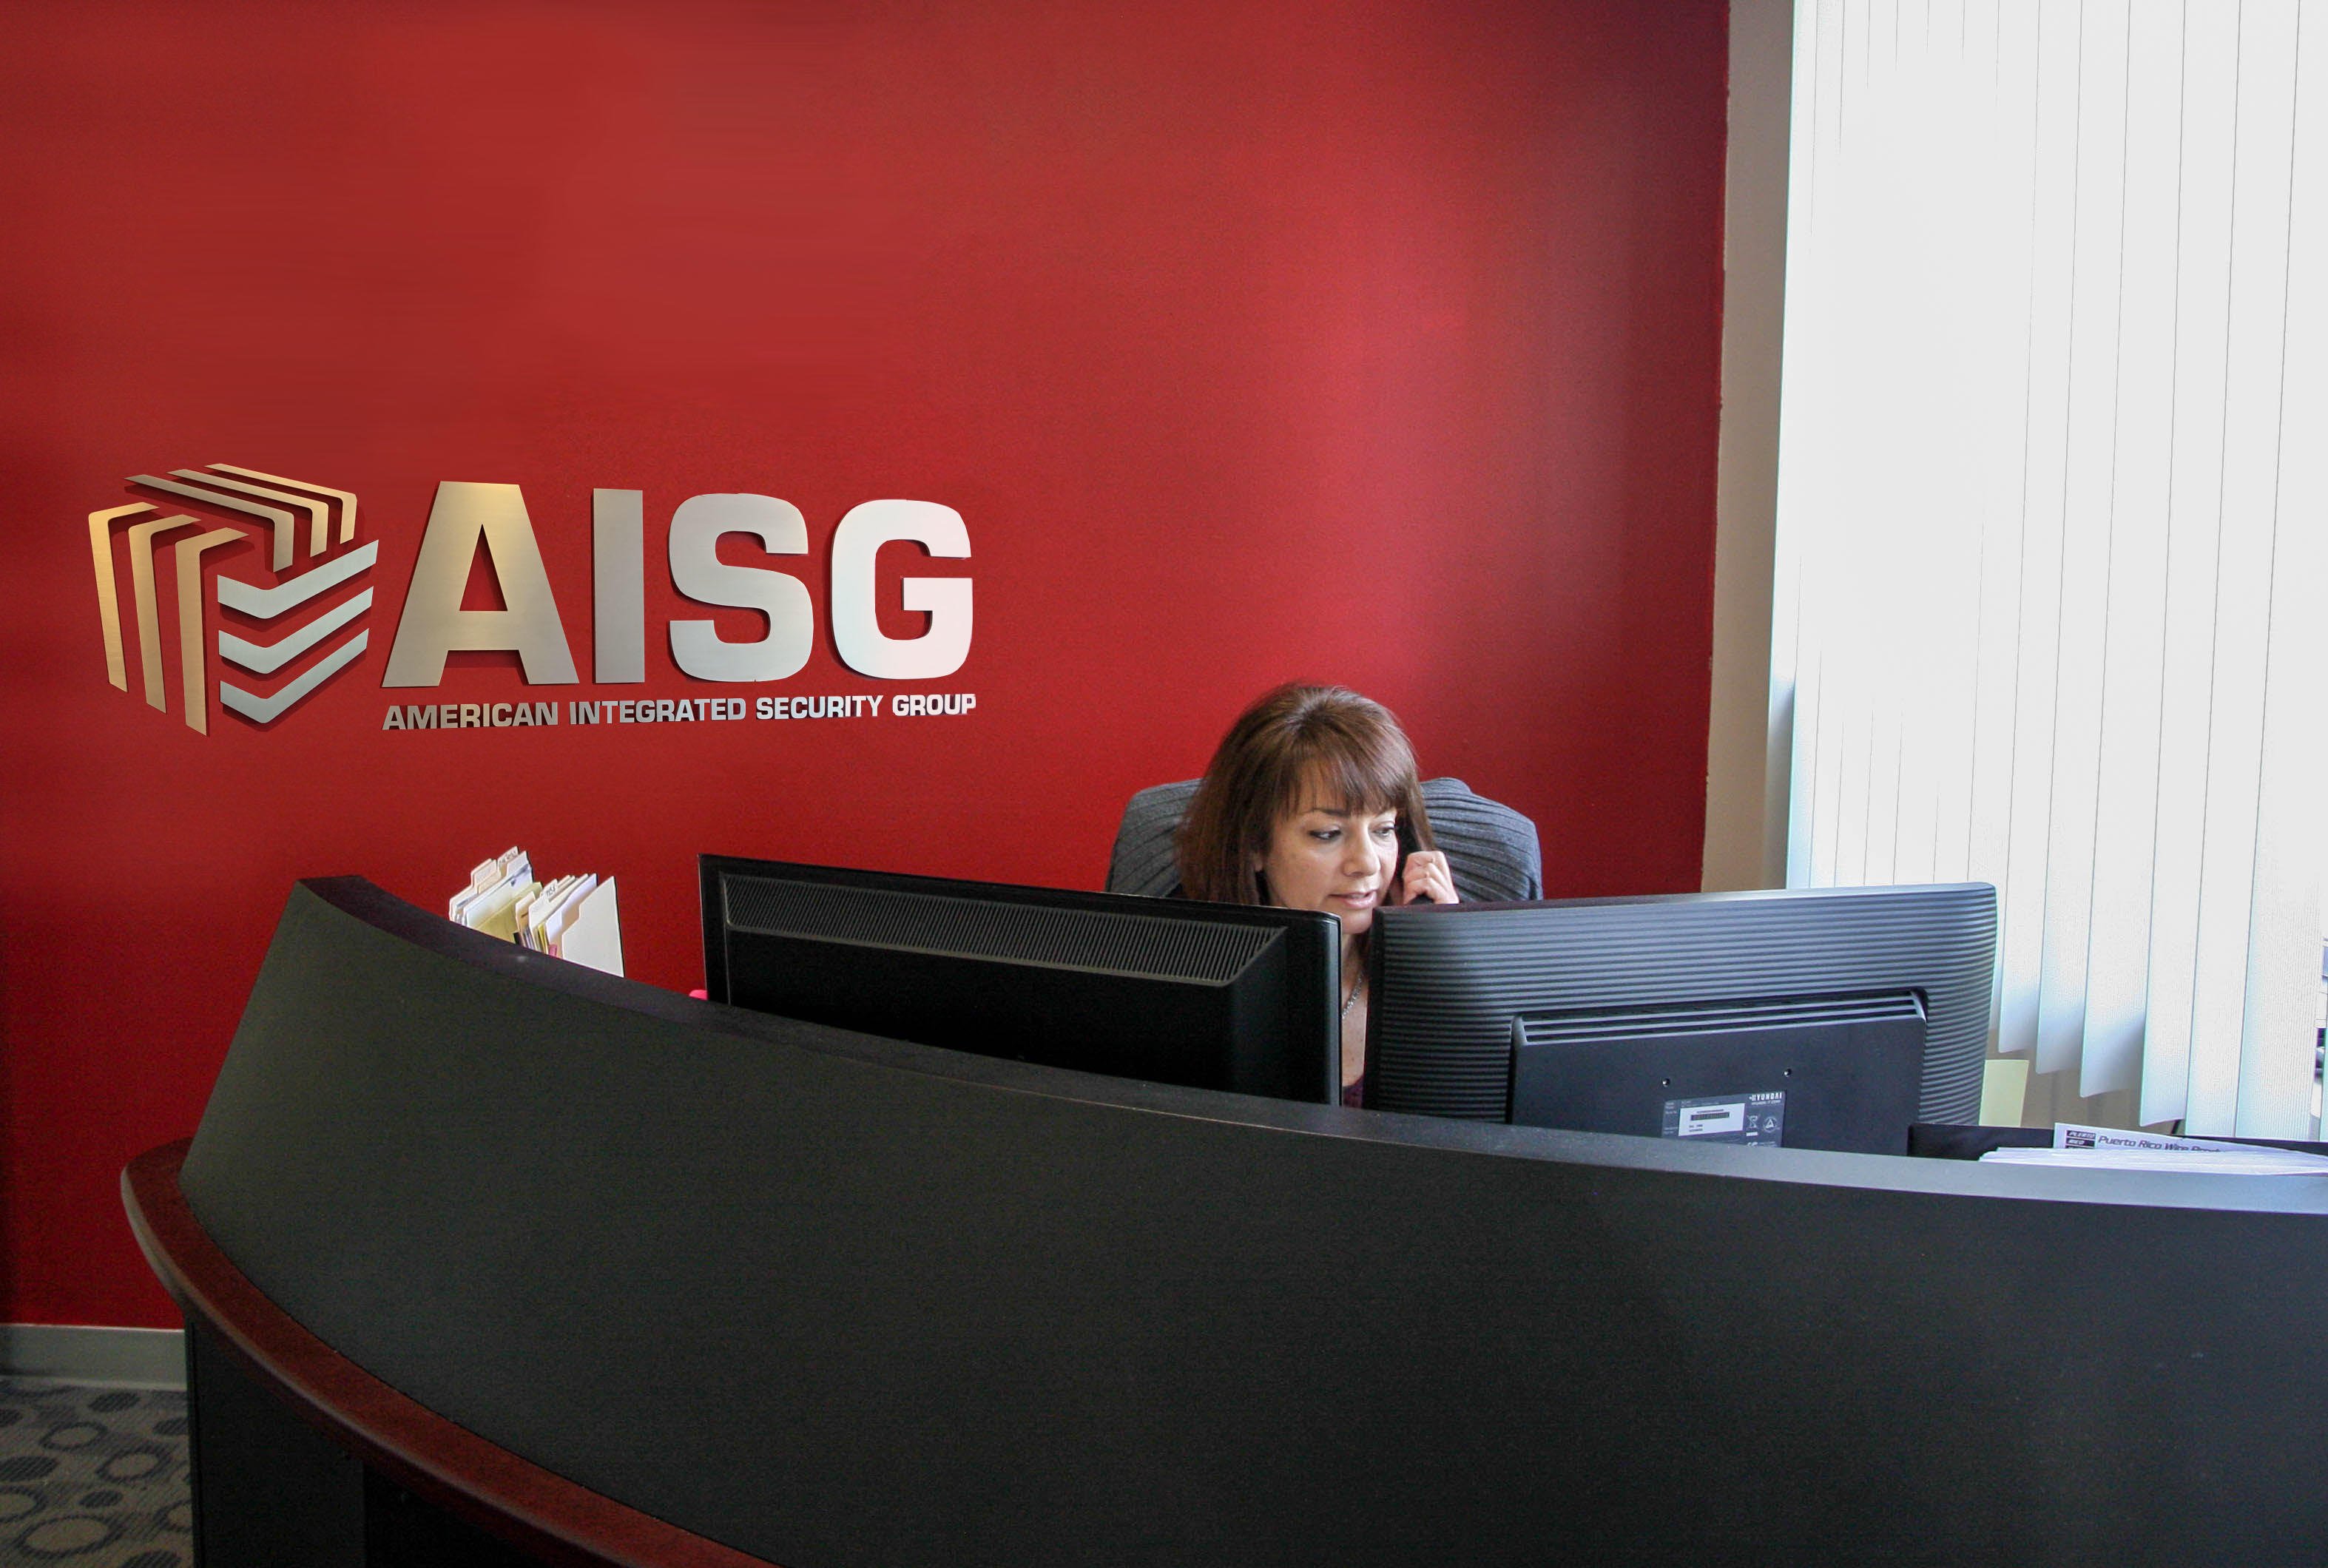 American Integrated Security Group (AISG) Photo